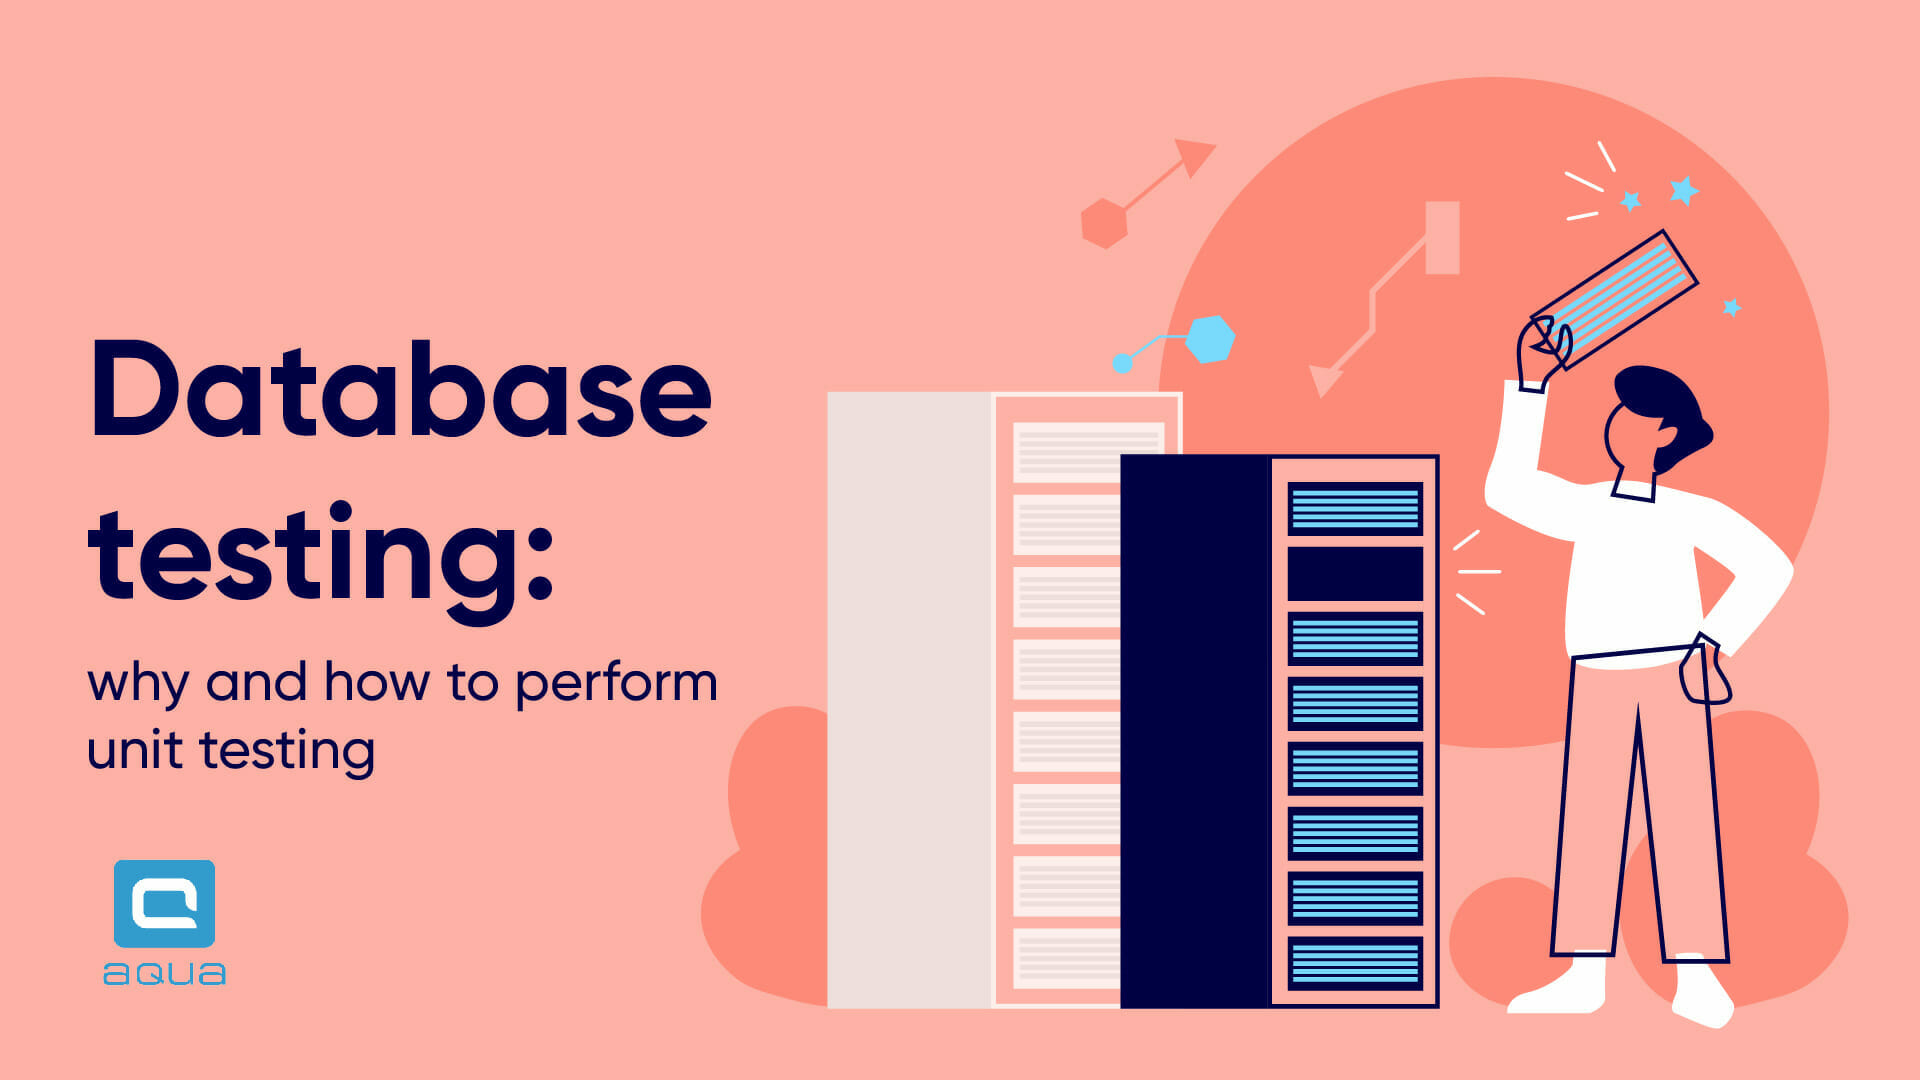 Database testing: why and how to perform unit testing